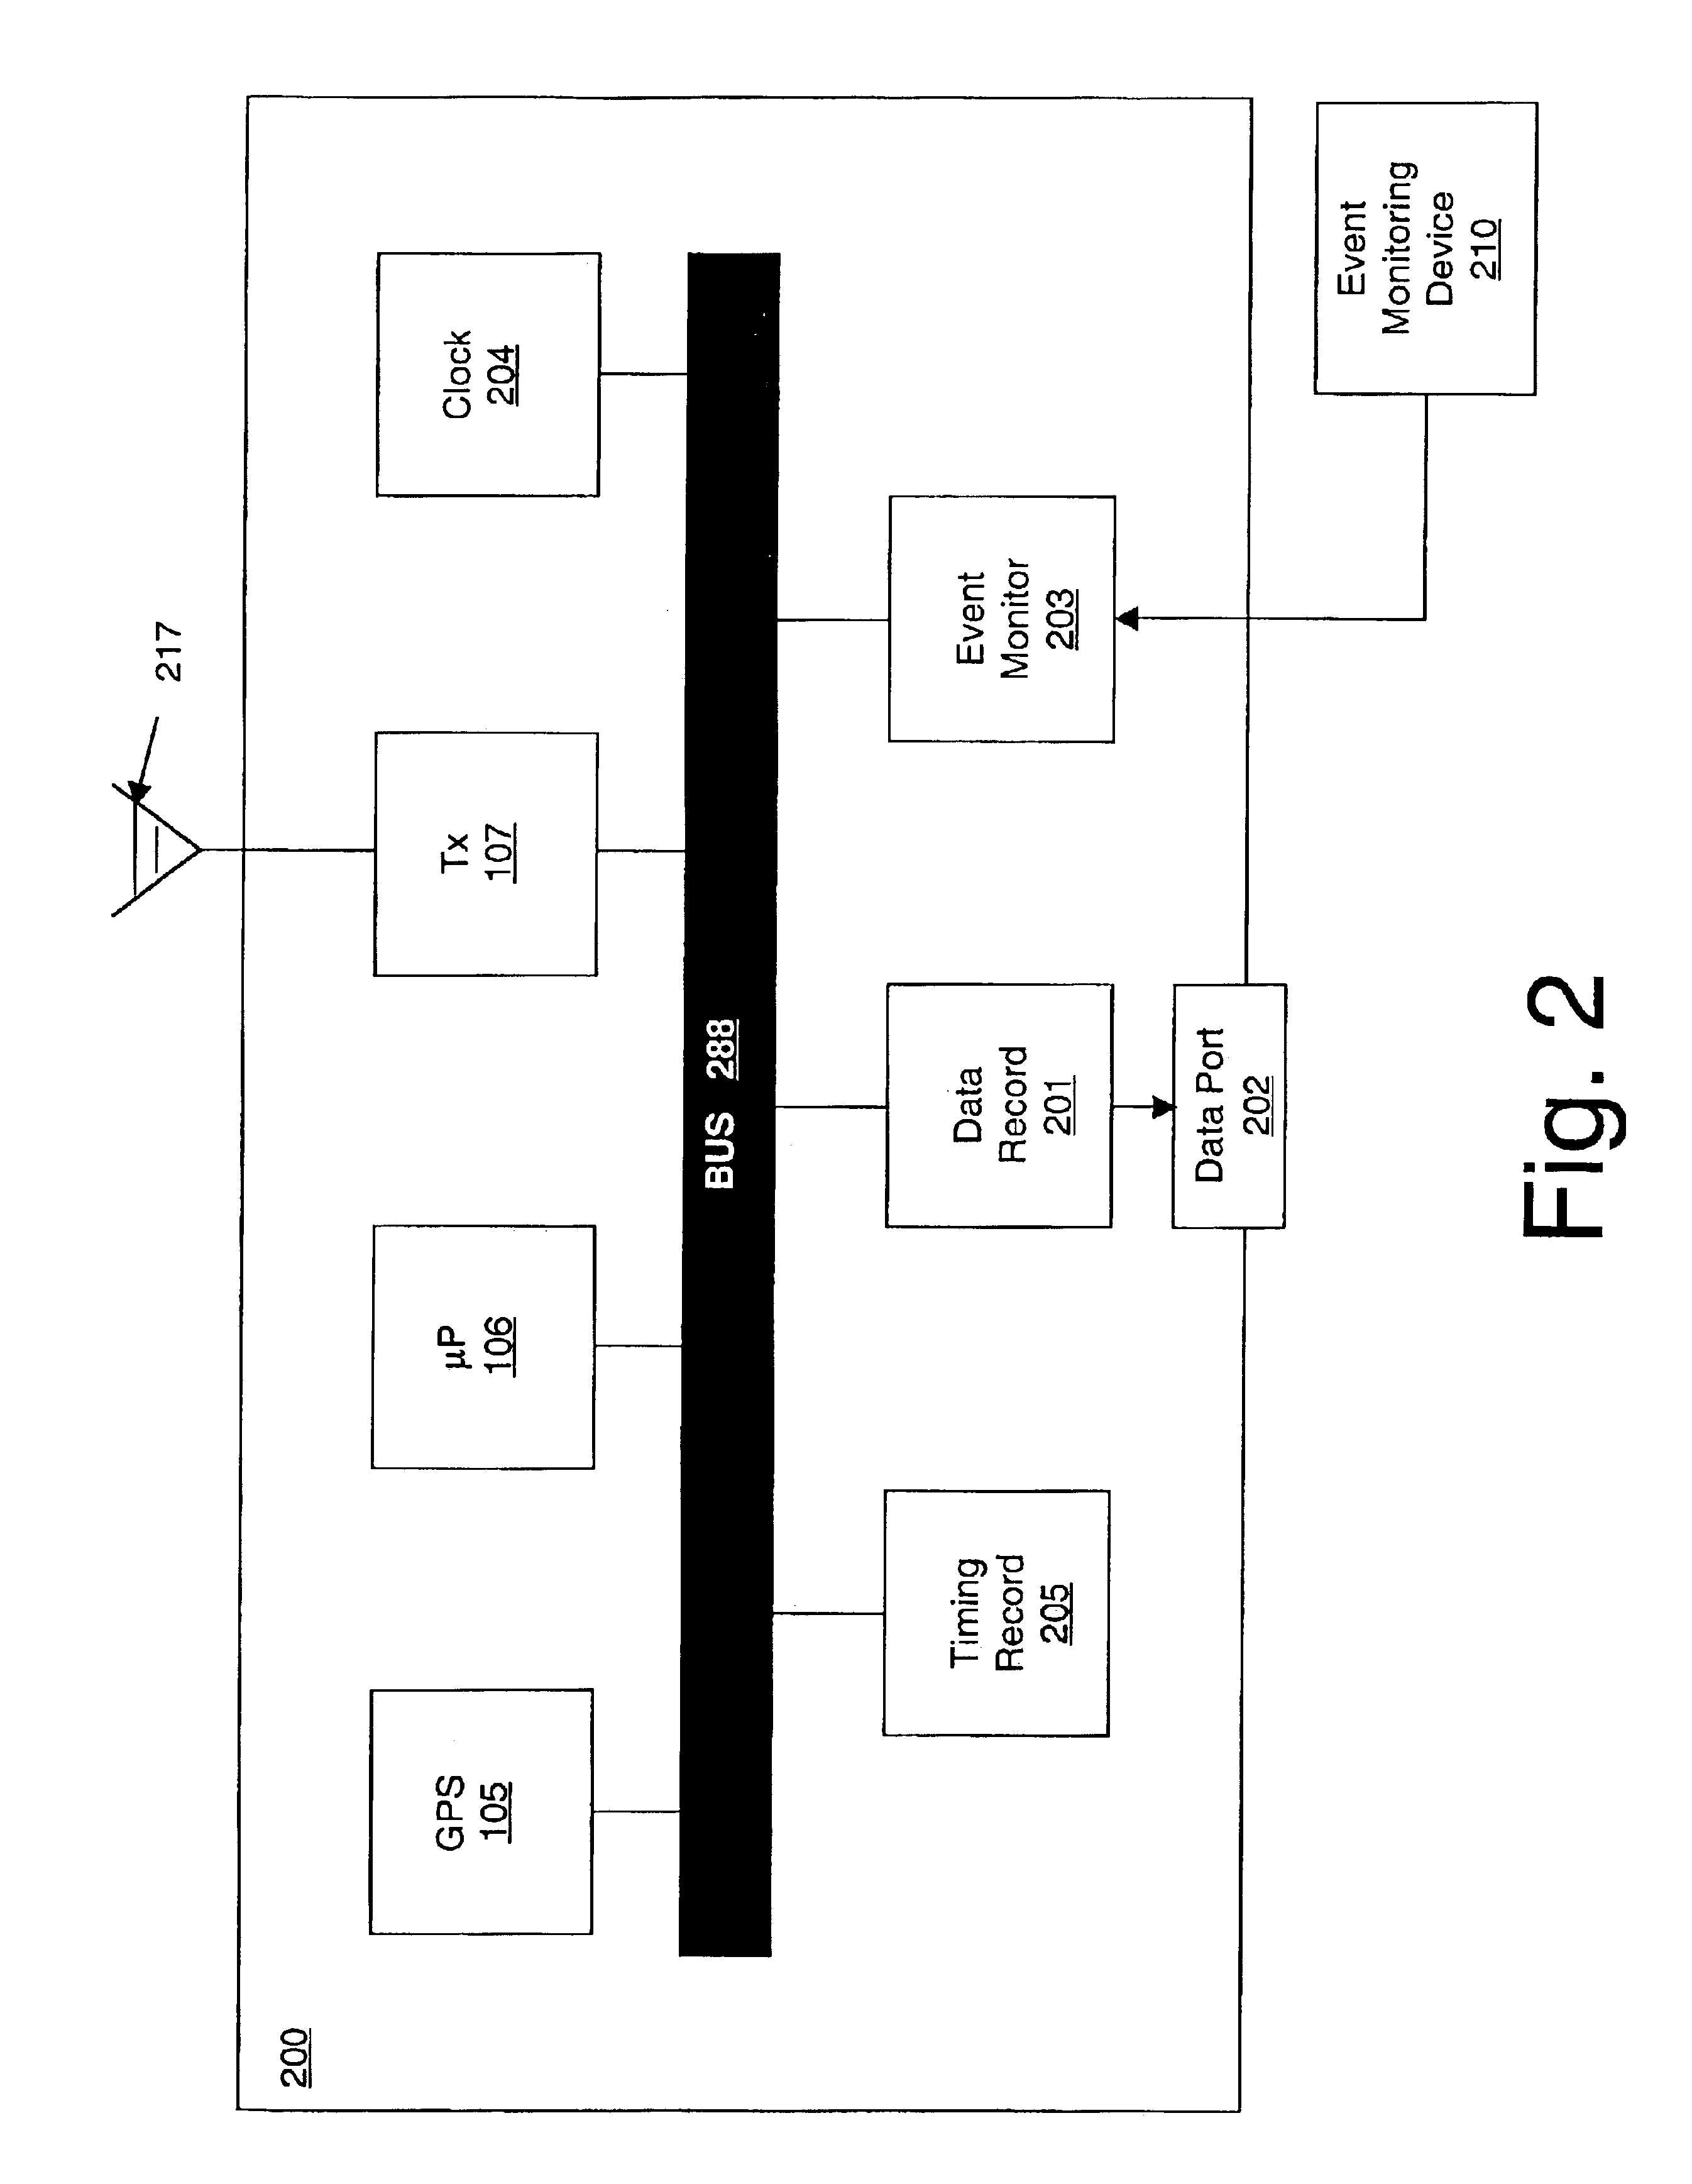 Method for inferring useful information from position-related vehicular events